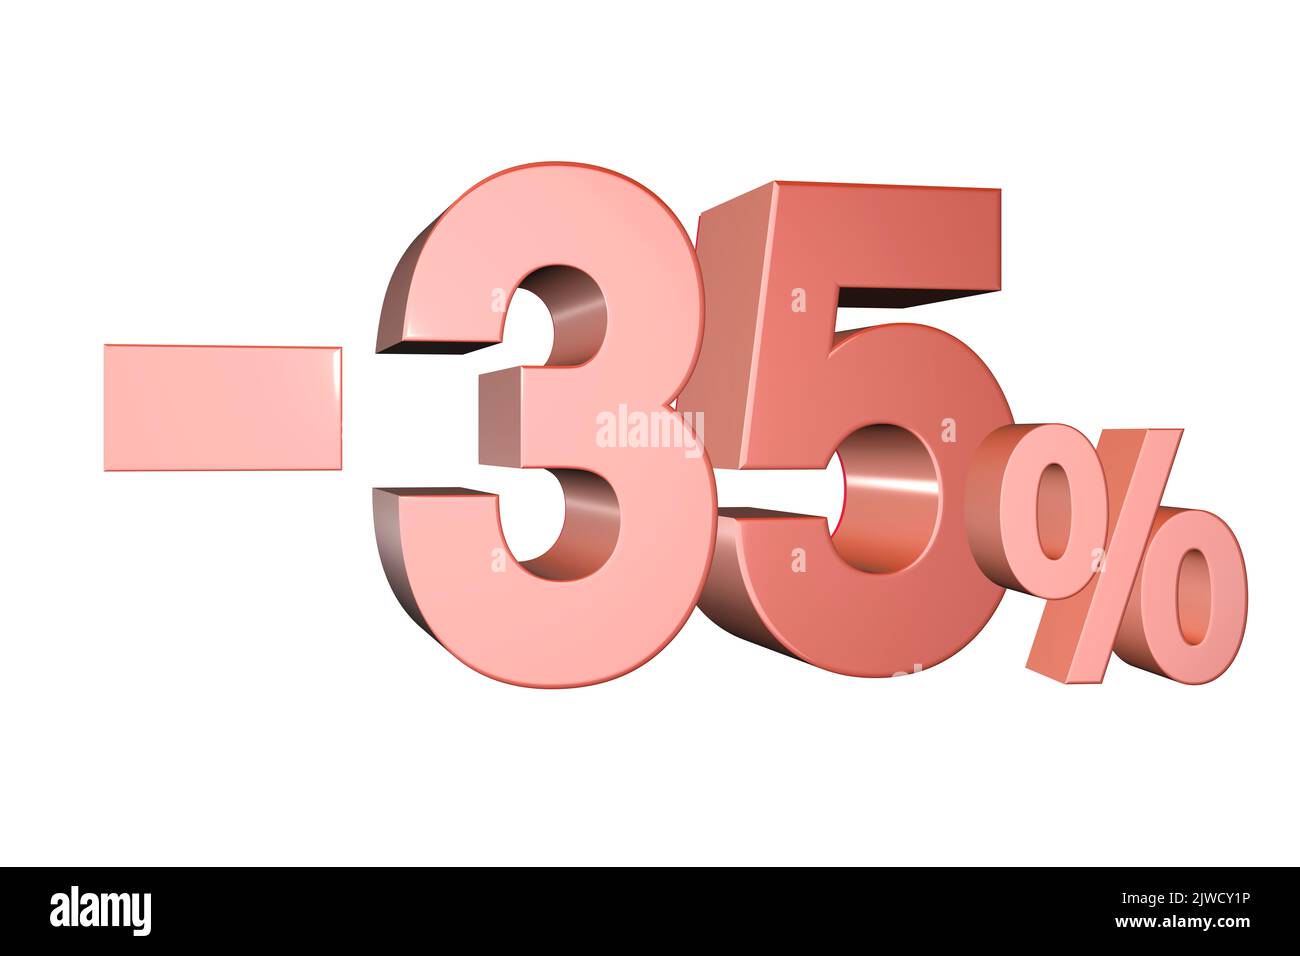 3D rendered discount banner marketing sign showing minus - 35% percent off Stock Photo